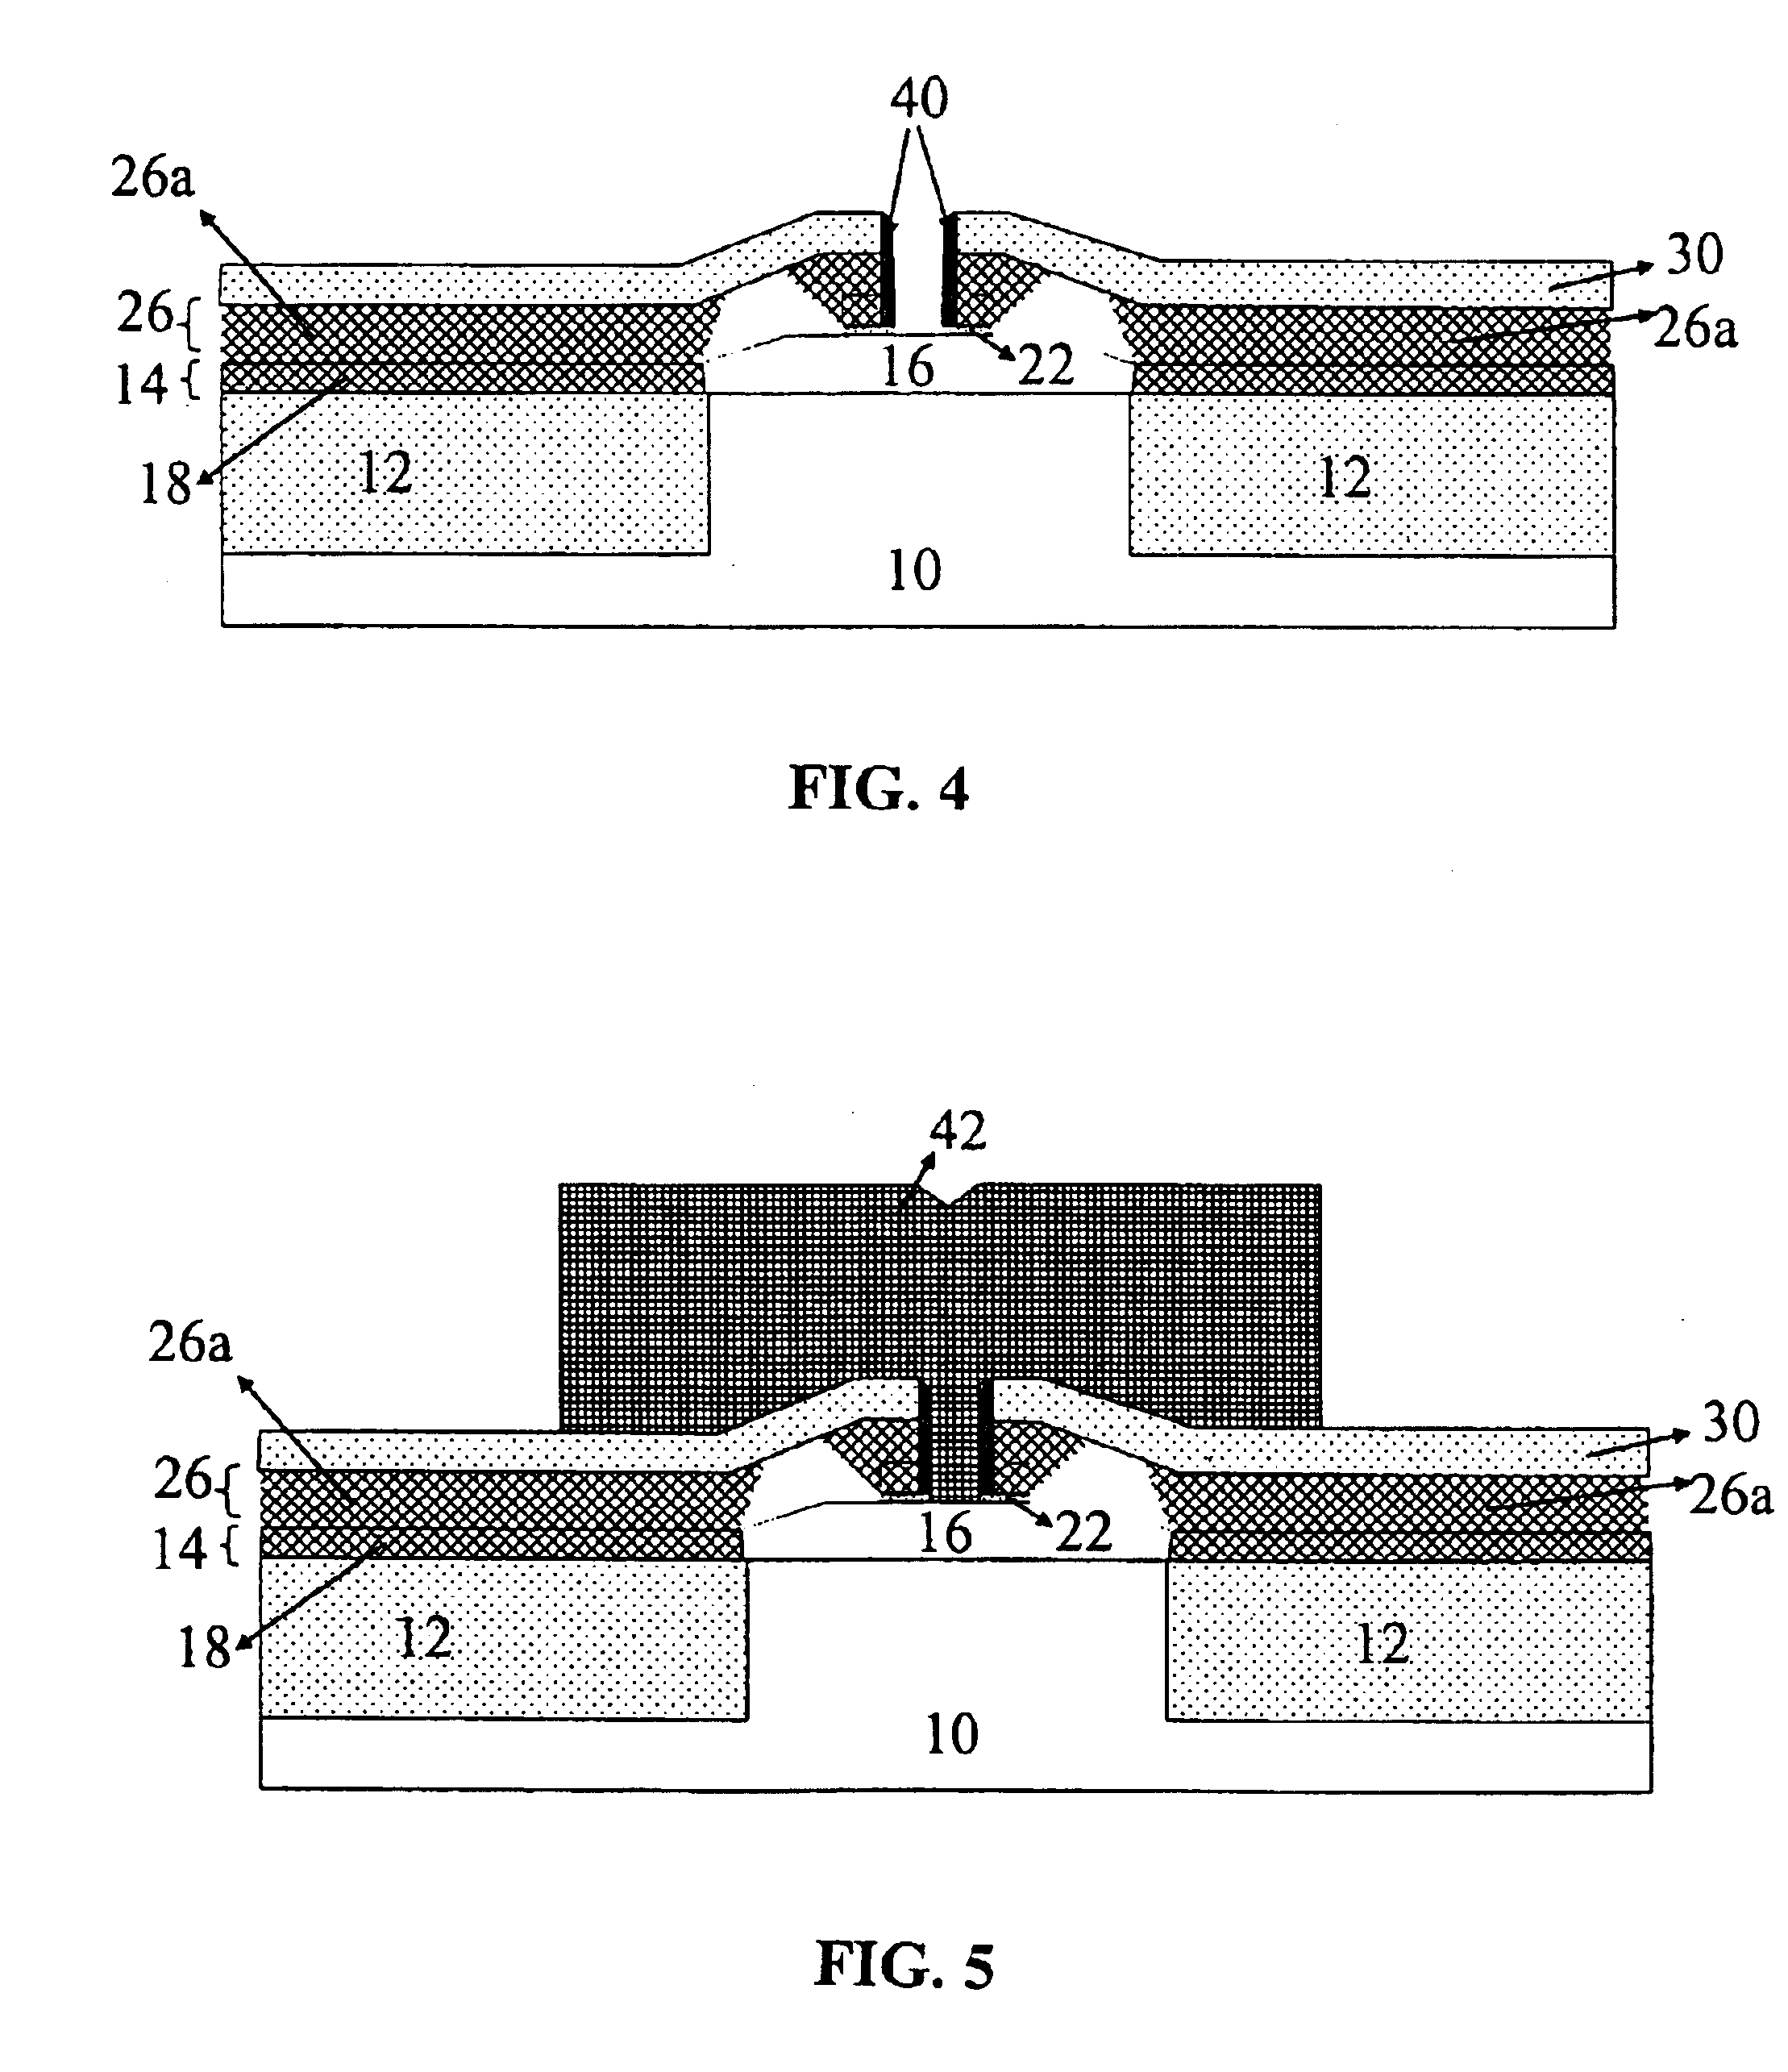 Method to fabricate high-performance NPN transistors in a BiCMOS process